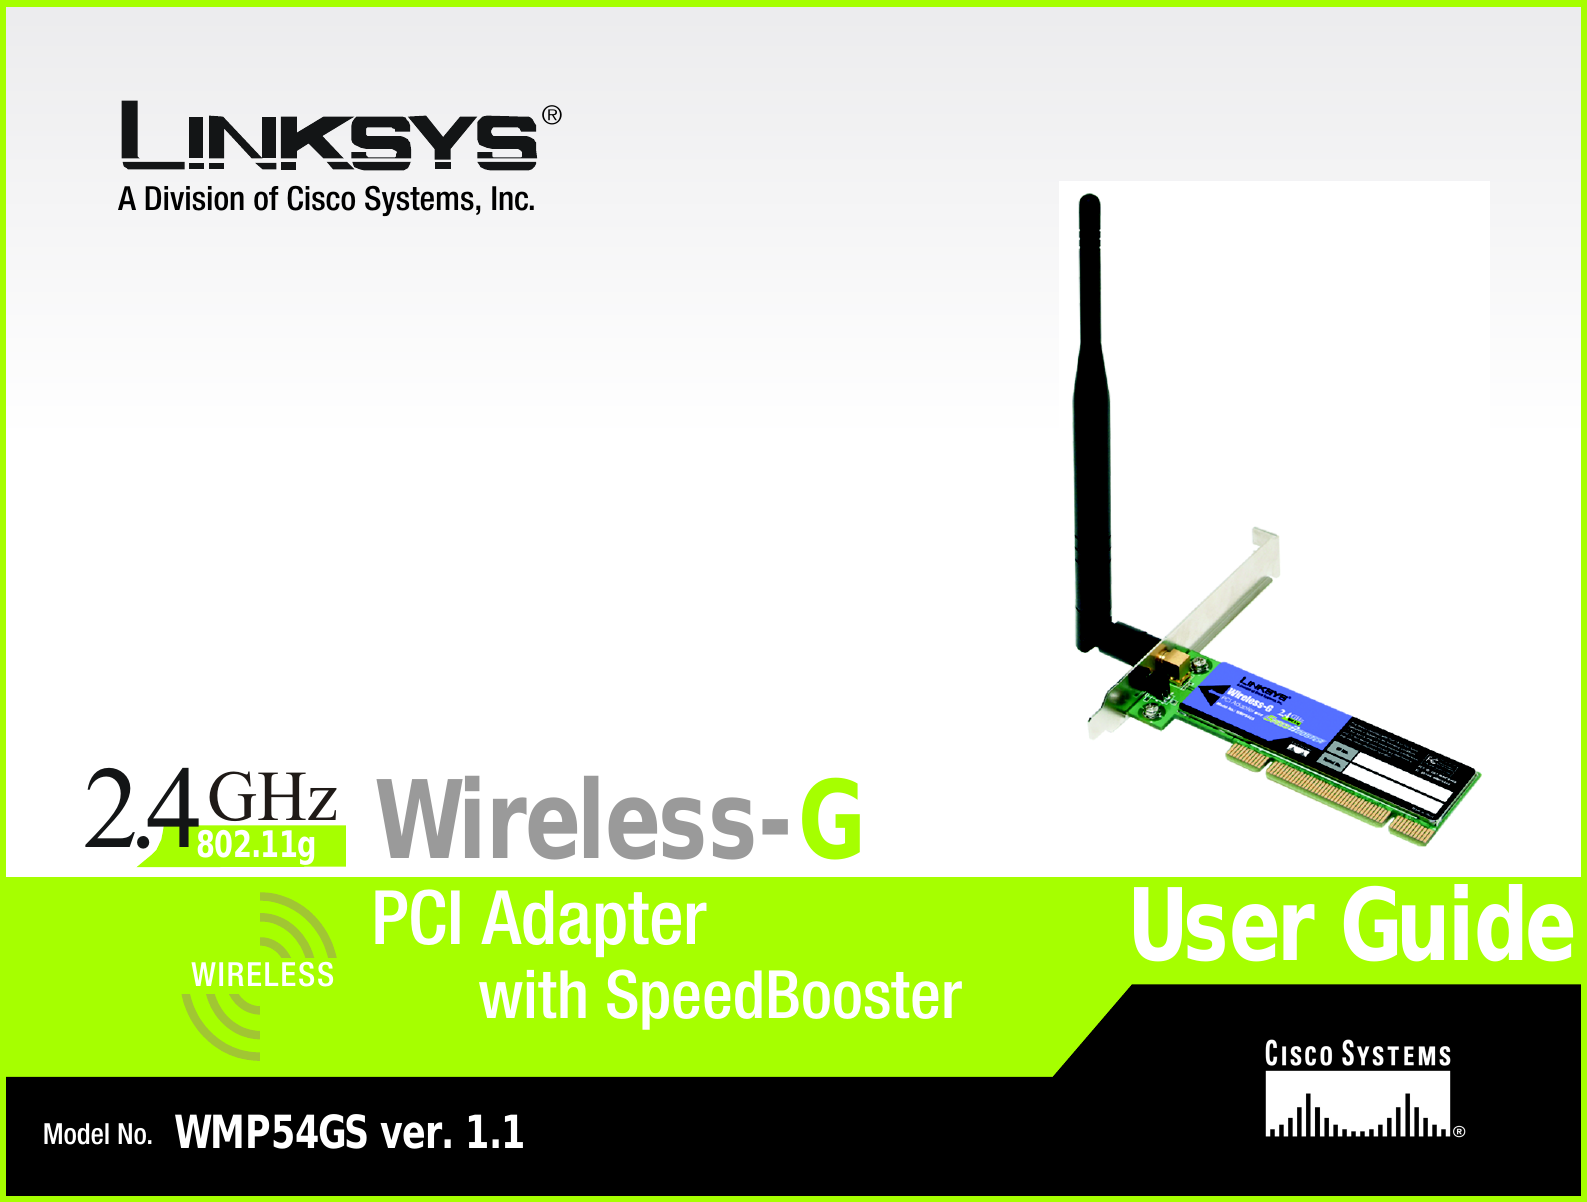 A Division of Cisco Systems, Inc.®Model No.PCI AdapterWireless-GWMP54GS ver. 1.1User GuideWIRELESSGHz2.4802.11gwith SpeedBooster